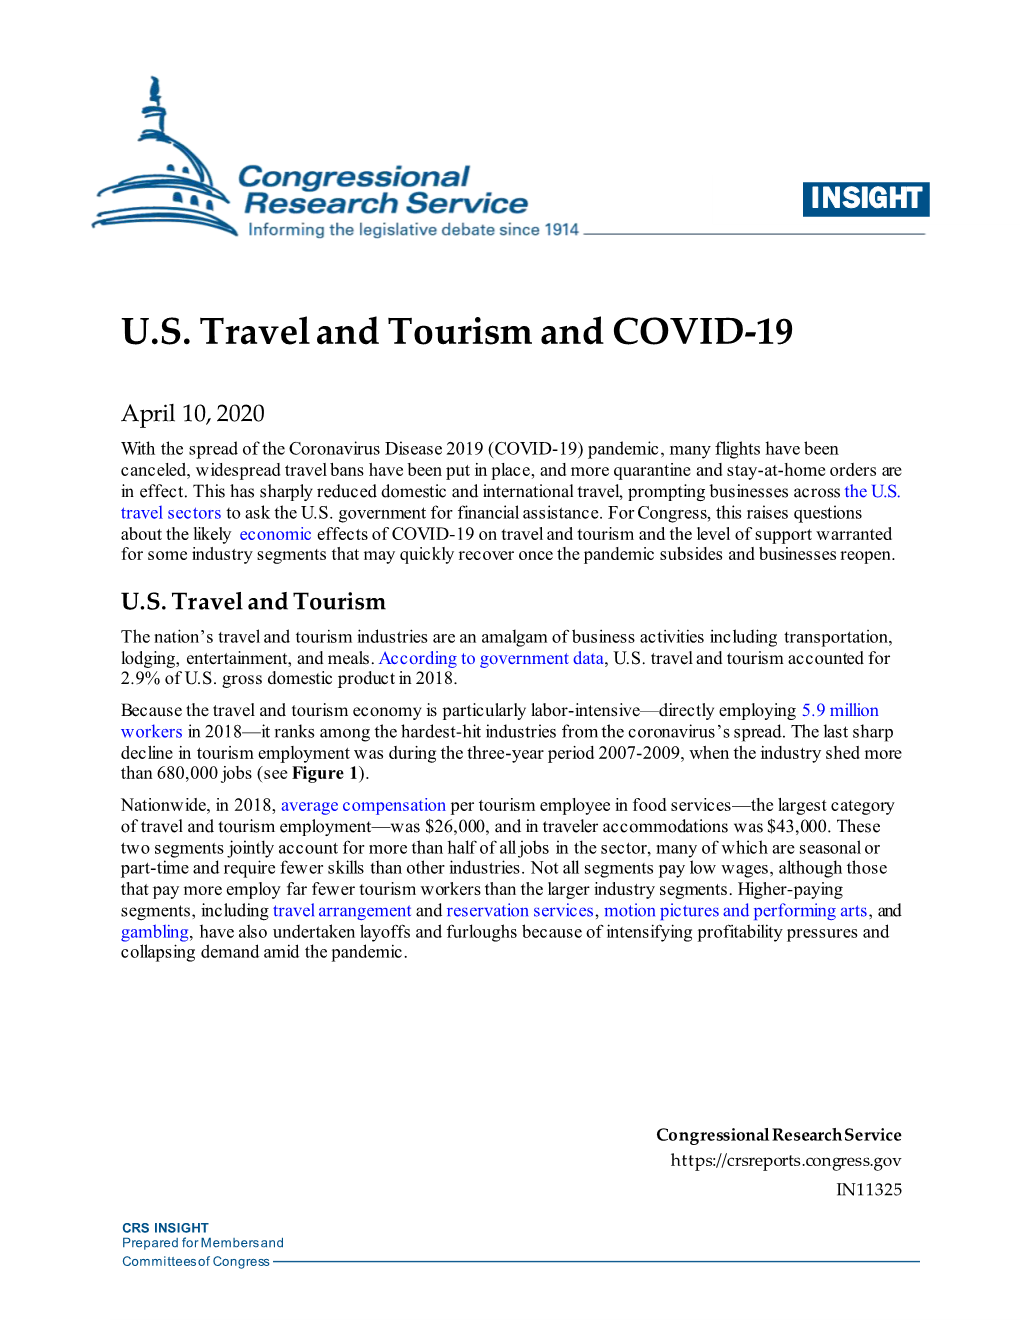 U.S. Travel and Tourism and COVID-19